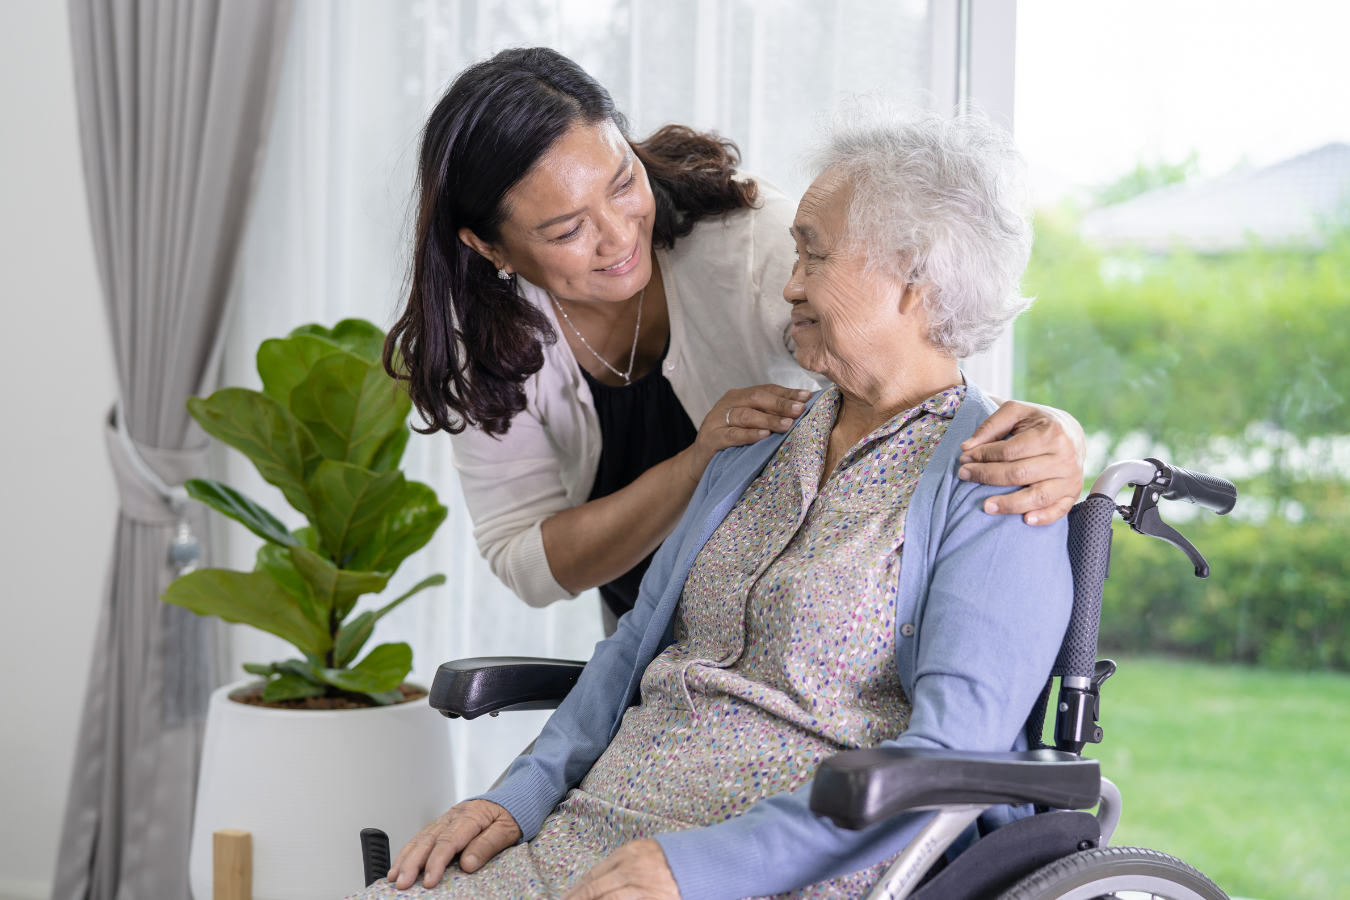 An adult woman and her Mother bond together at the Mother's home - a Residential Care facility.